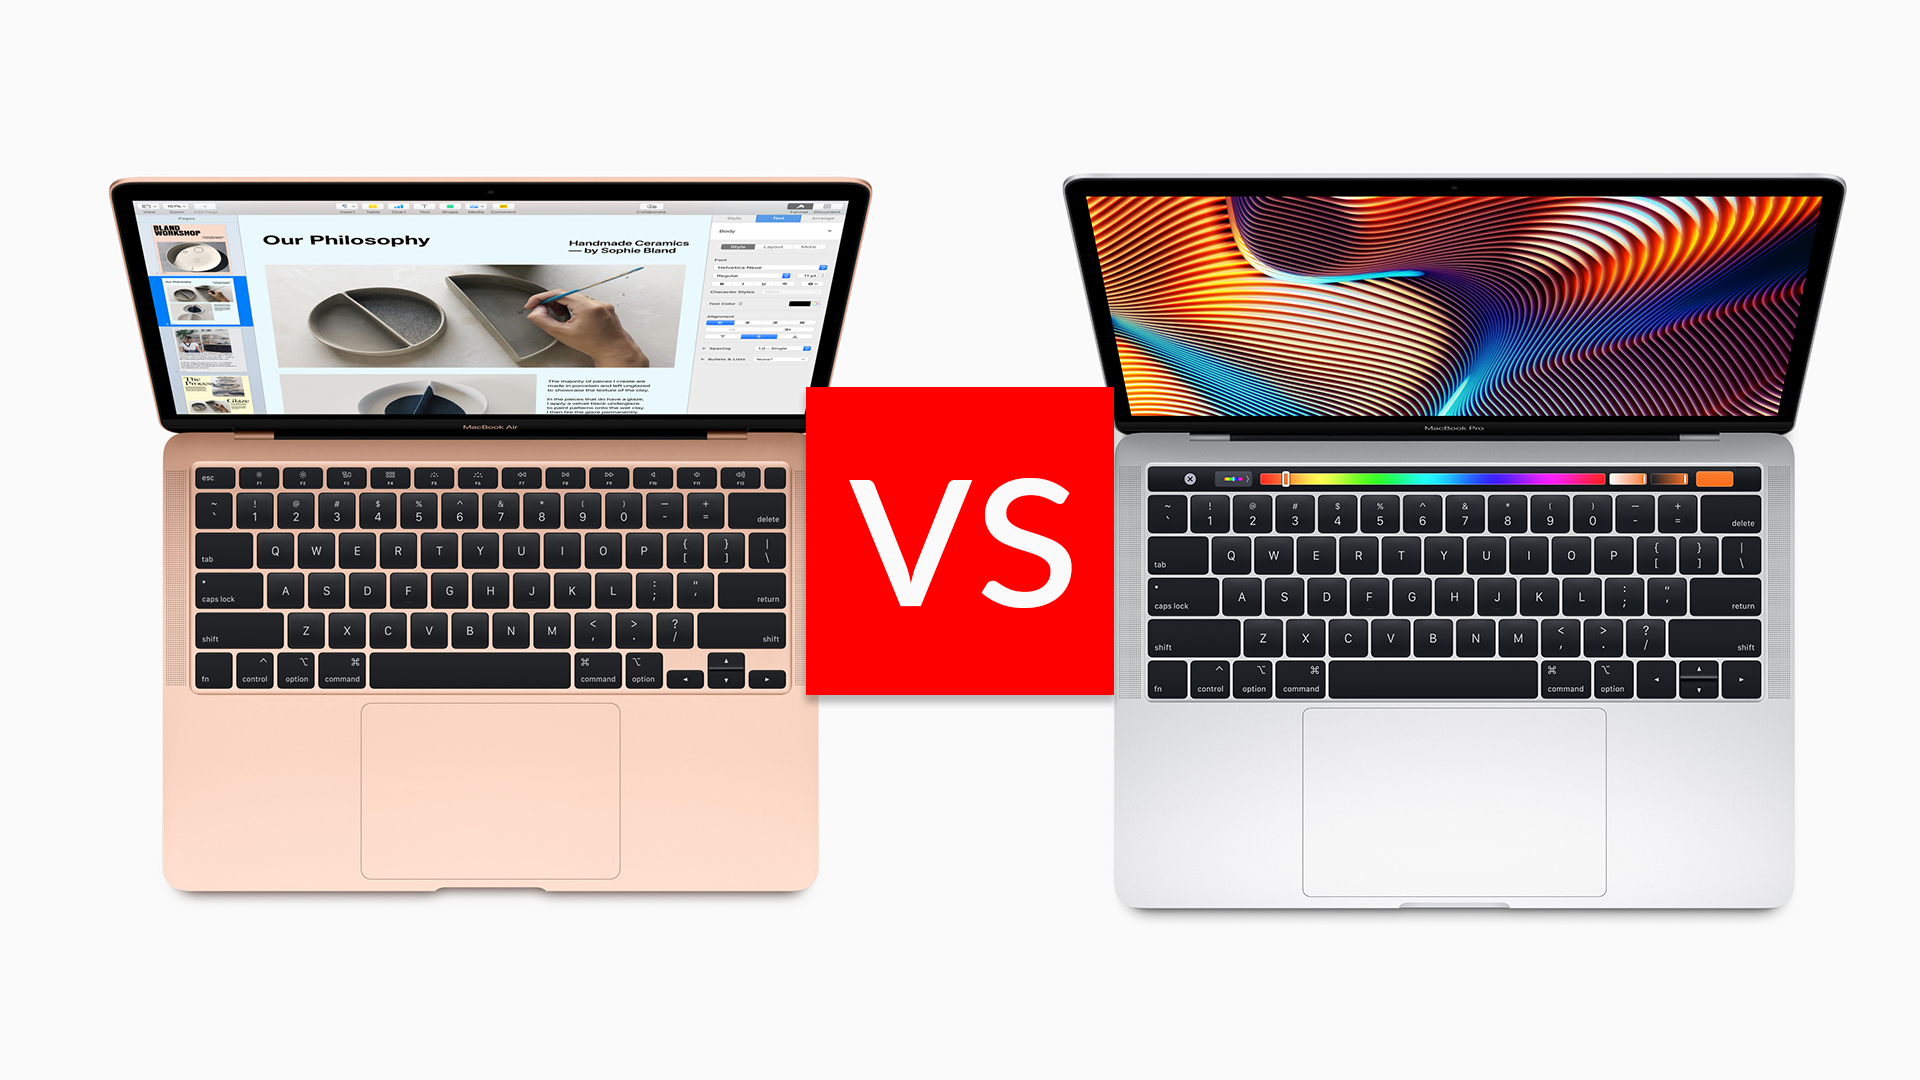 Why is the MacBook Pro Better than the MacBook Air?